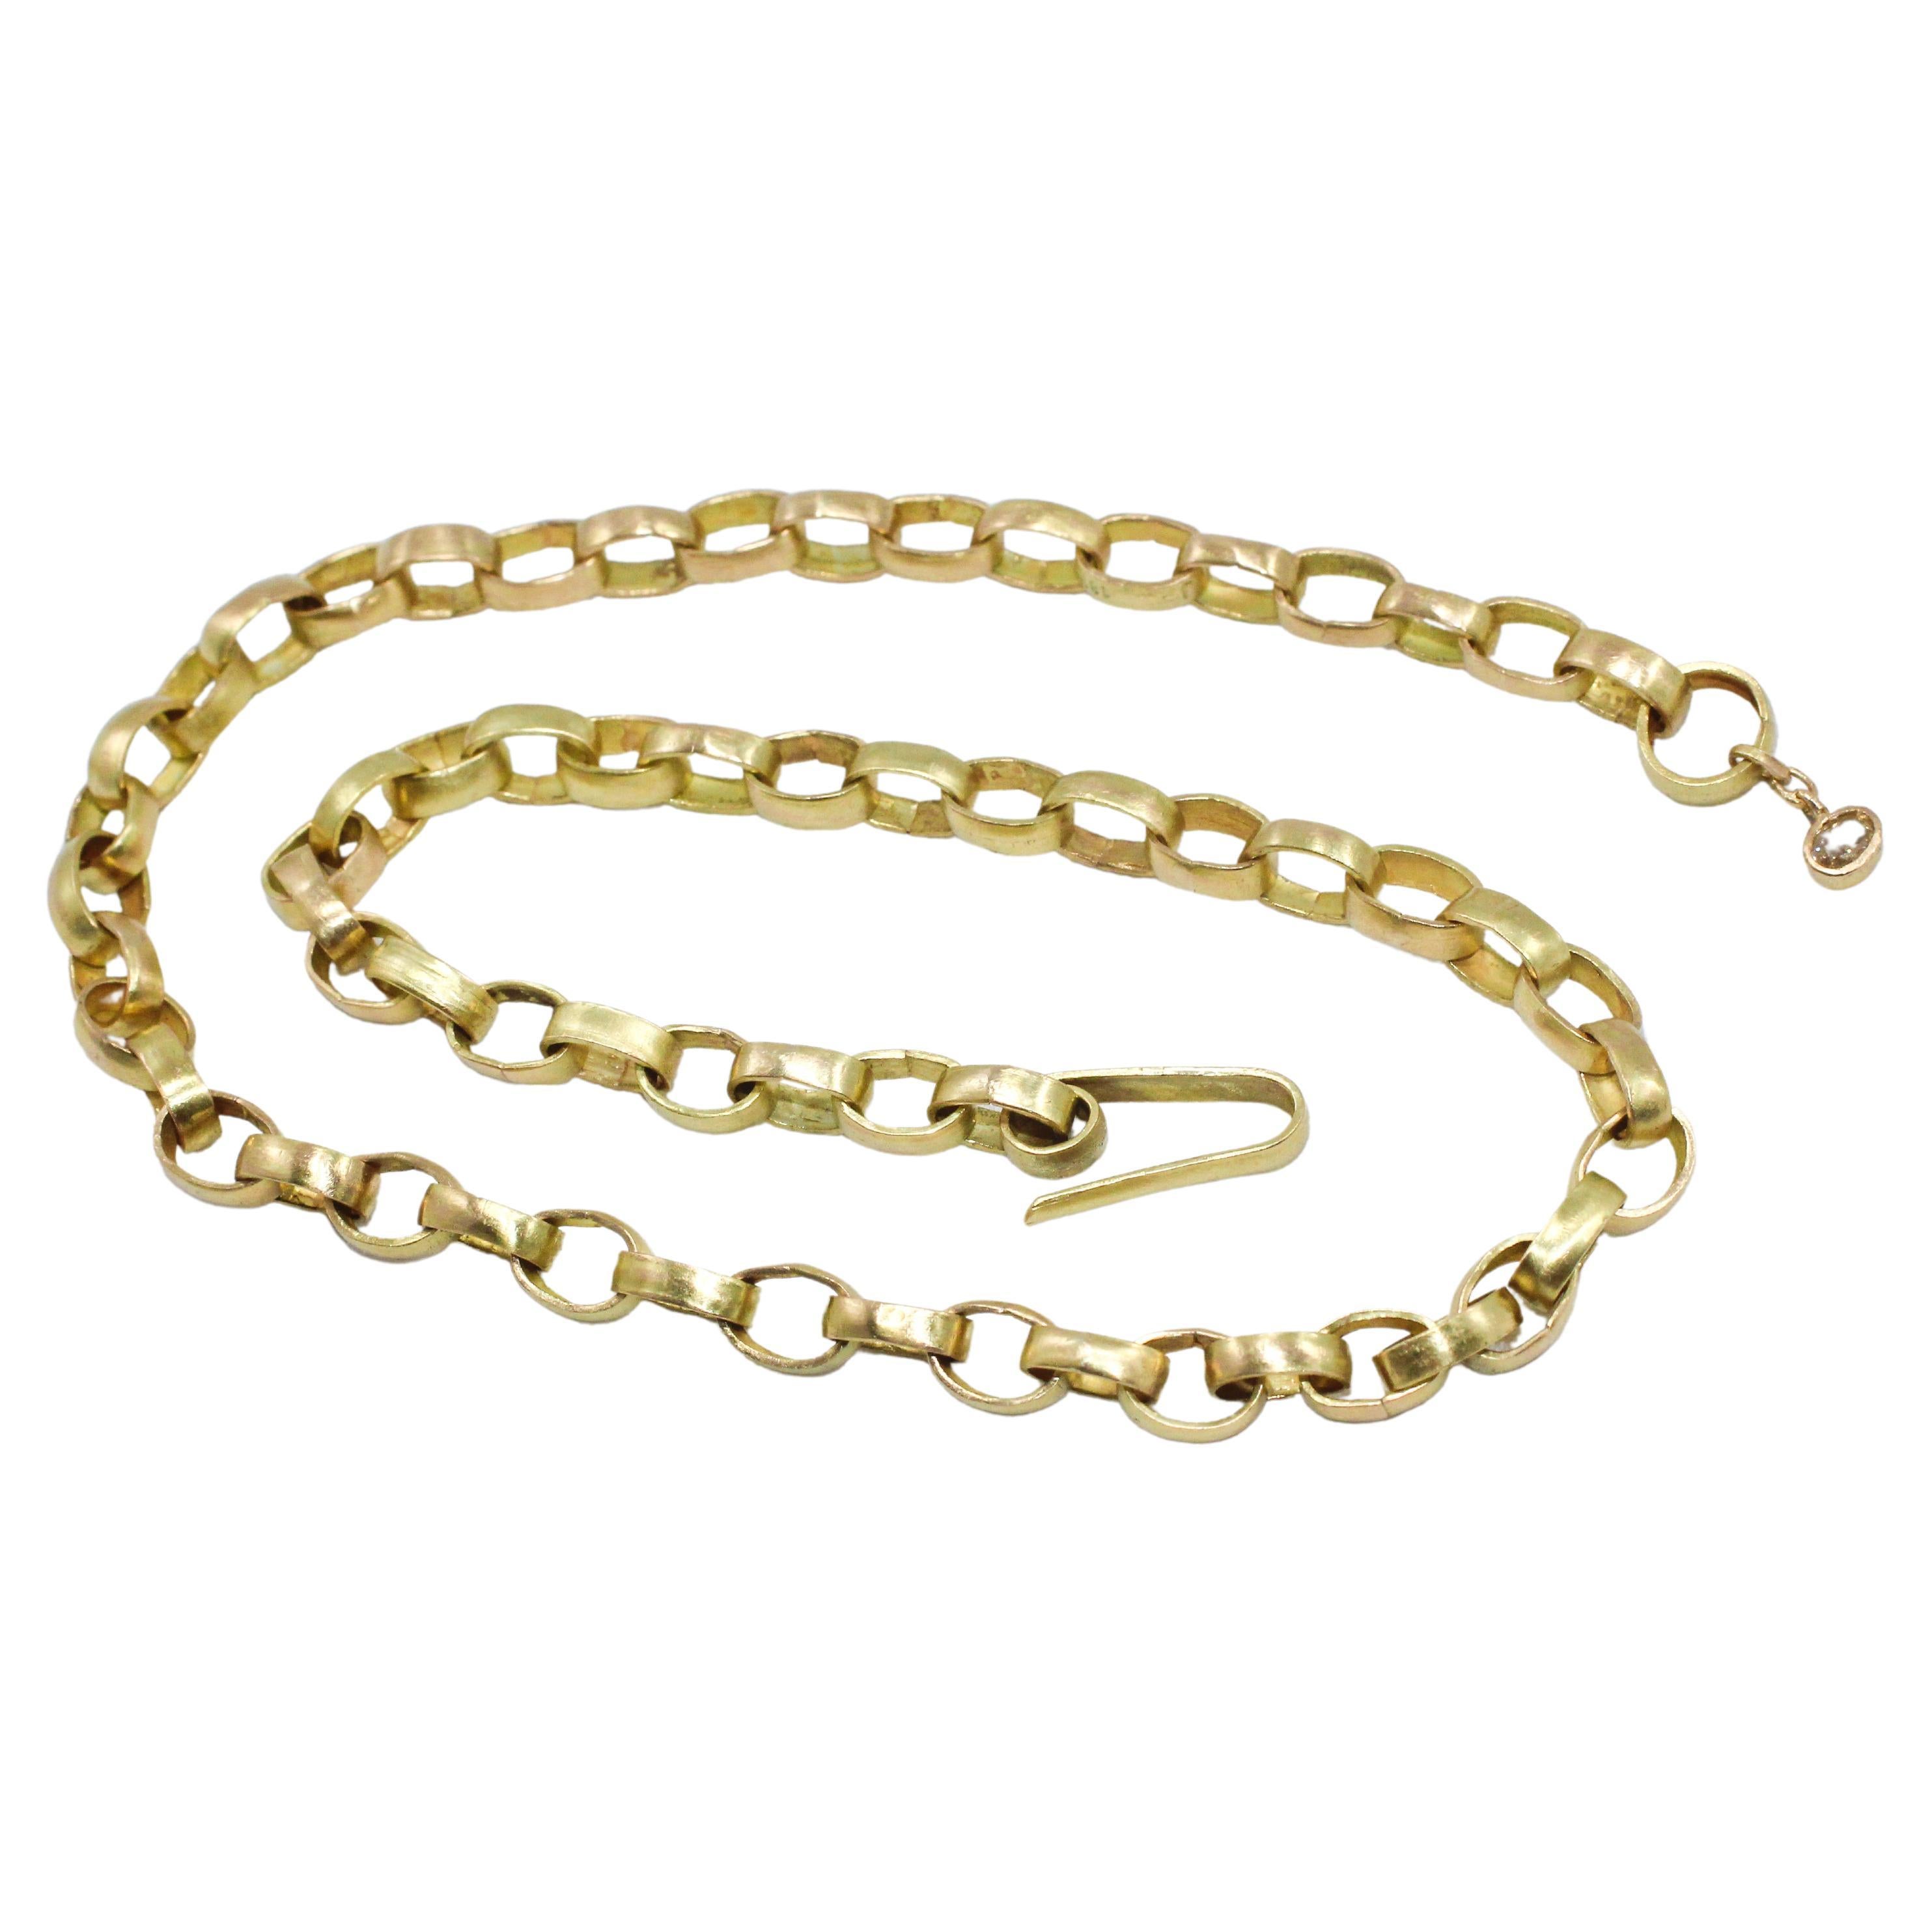 Recycled 18 Karat Gold Link Chain Necklace